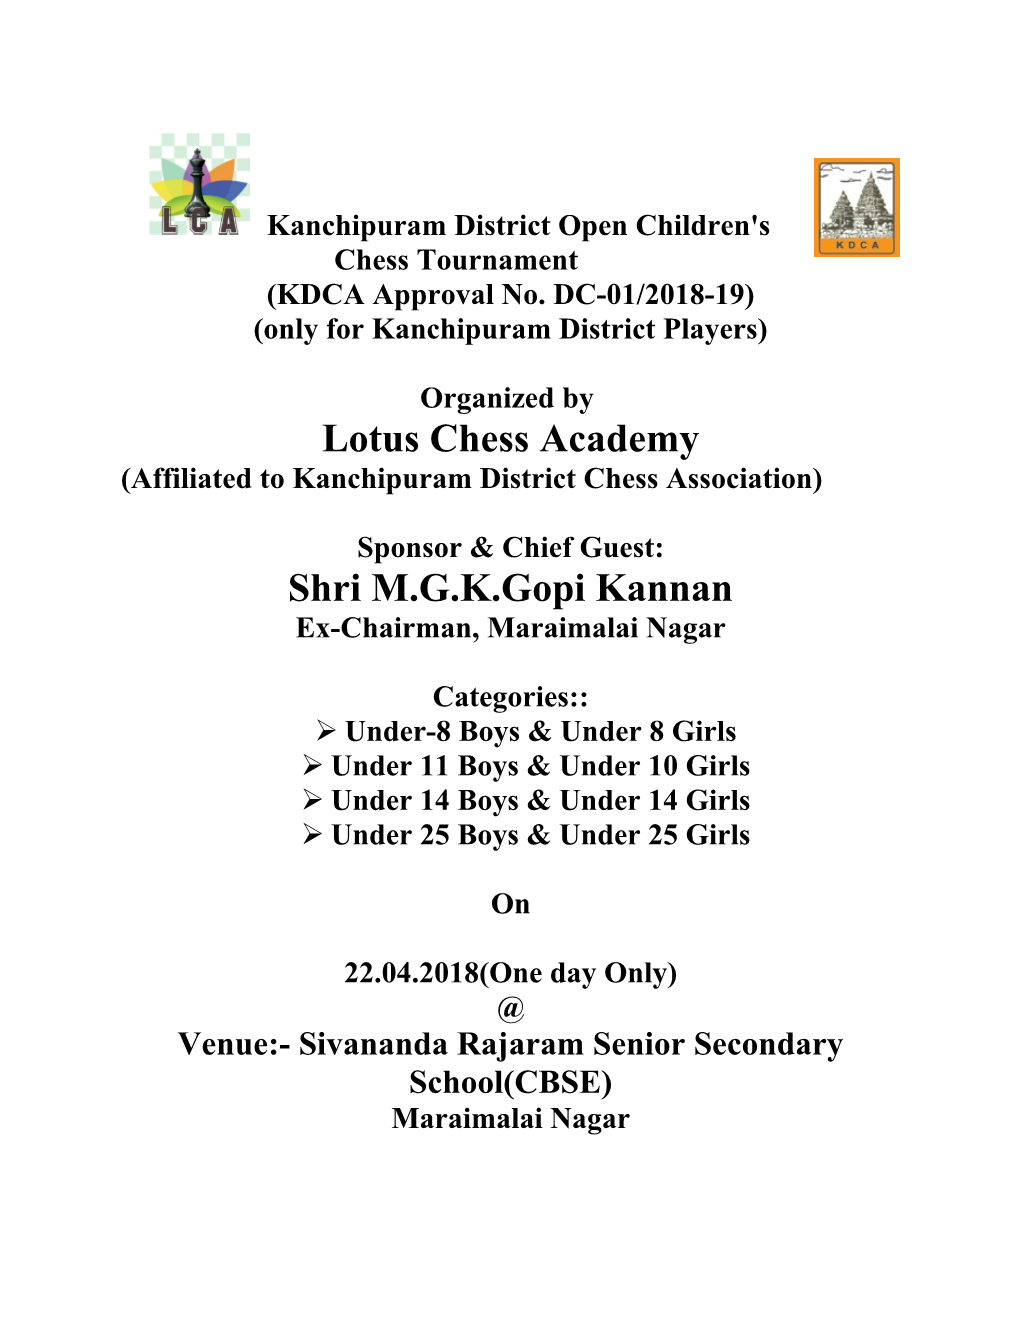 Only for Kanchipuram District Players